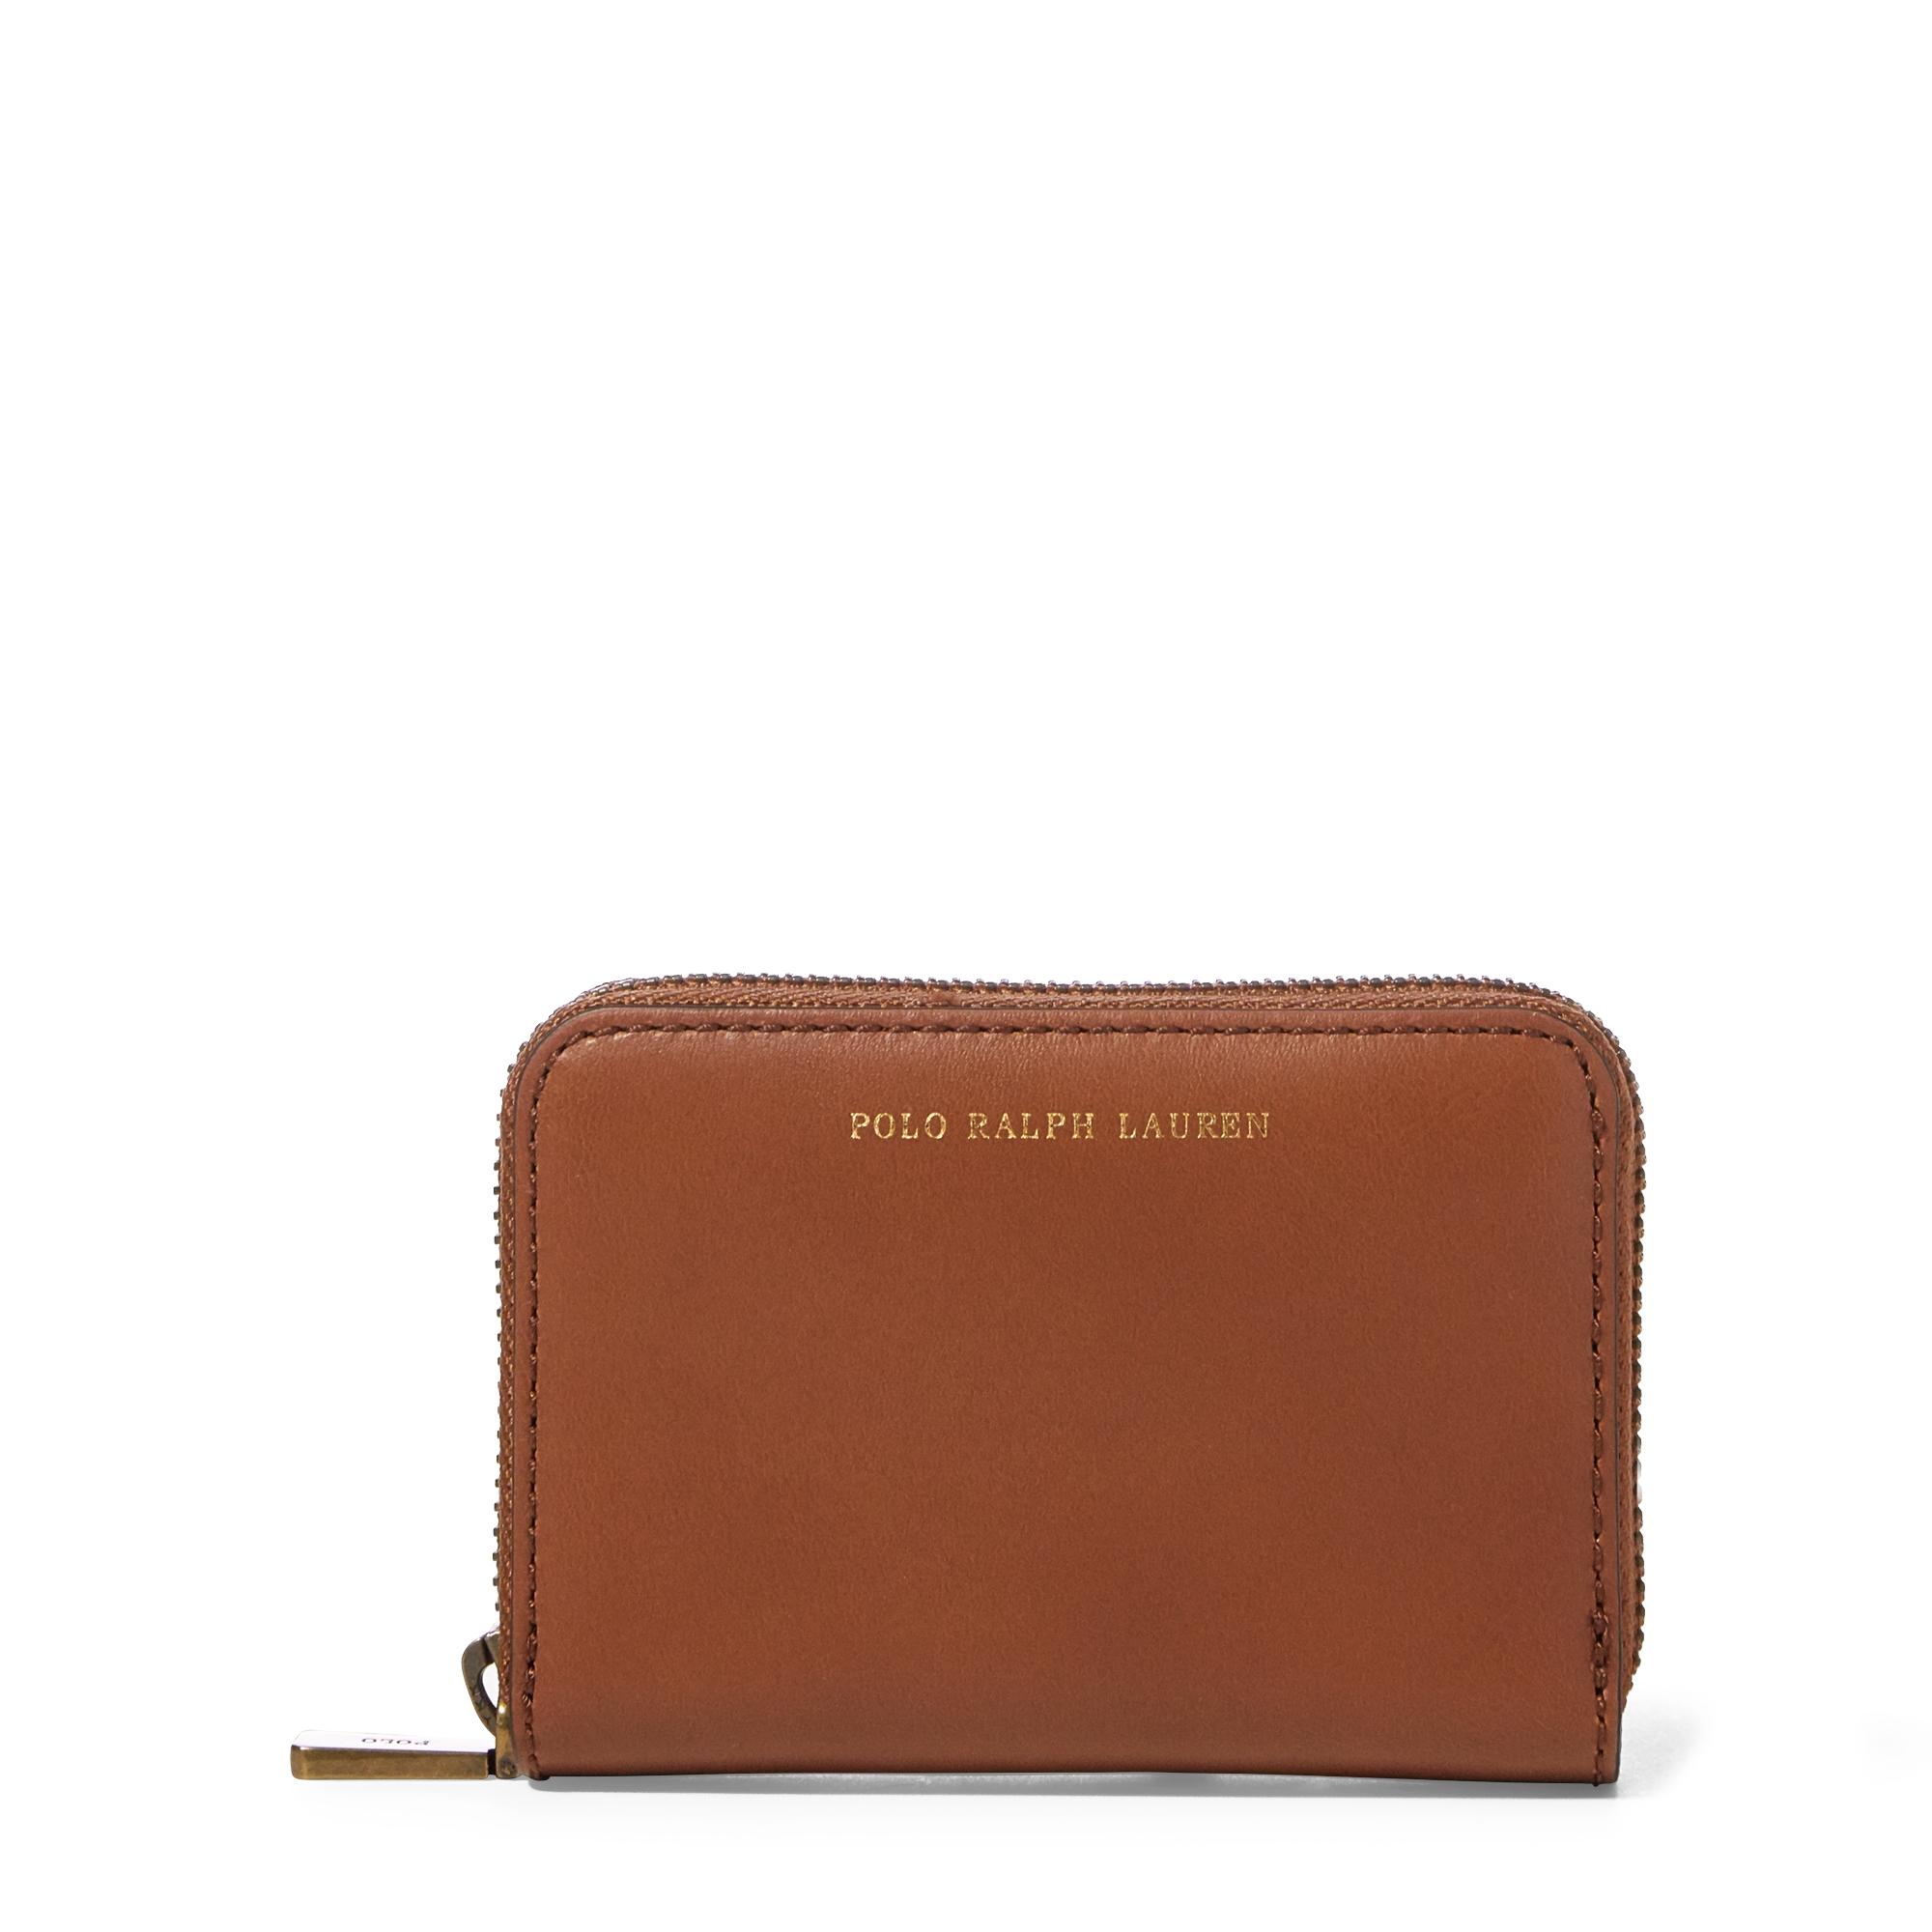 Polo Ralph Lauren Core Smooth Leather Zip Wallet in Brown | Lyst